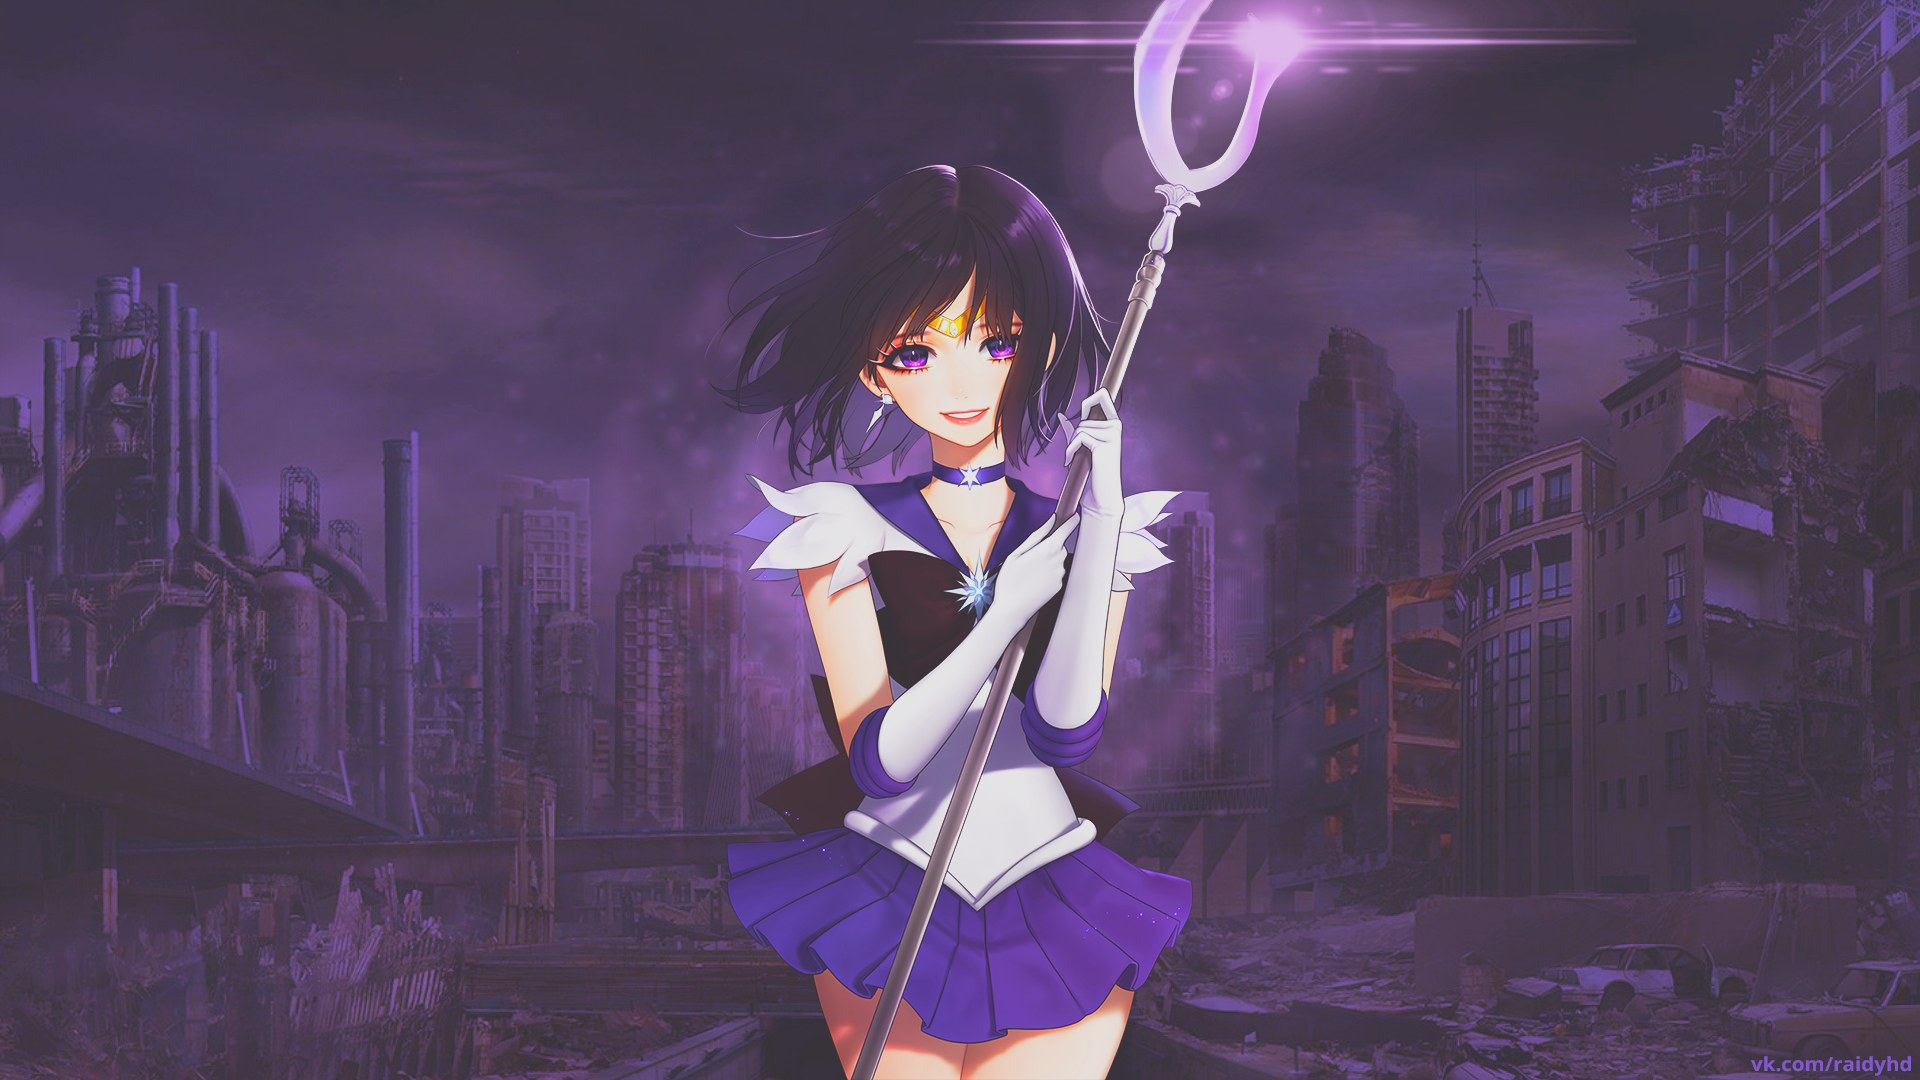 Anime 1920x1080 anime anime girls picture-in-picture Sailor Saturn Sailor Moon